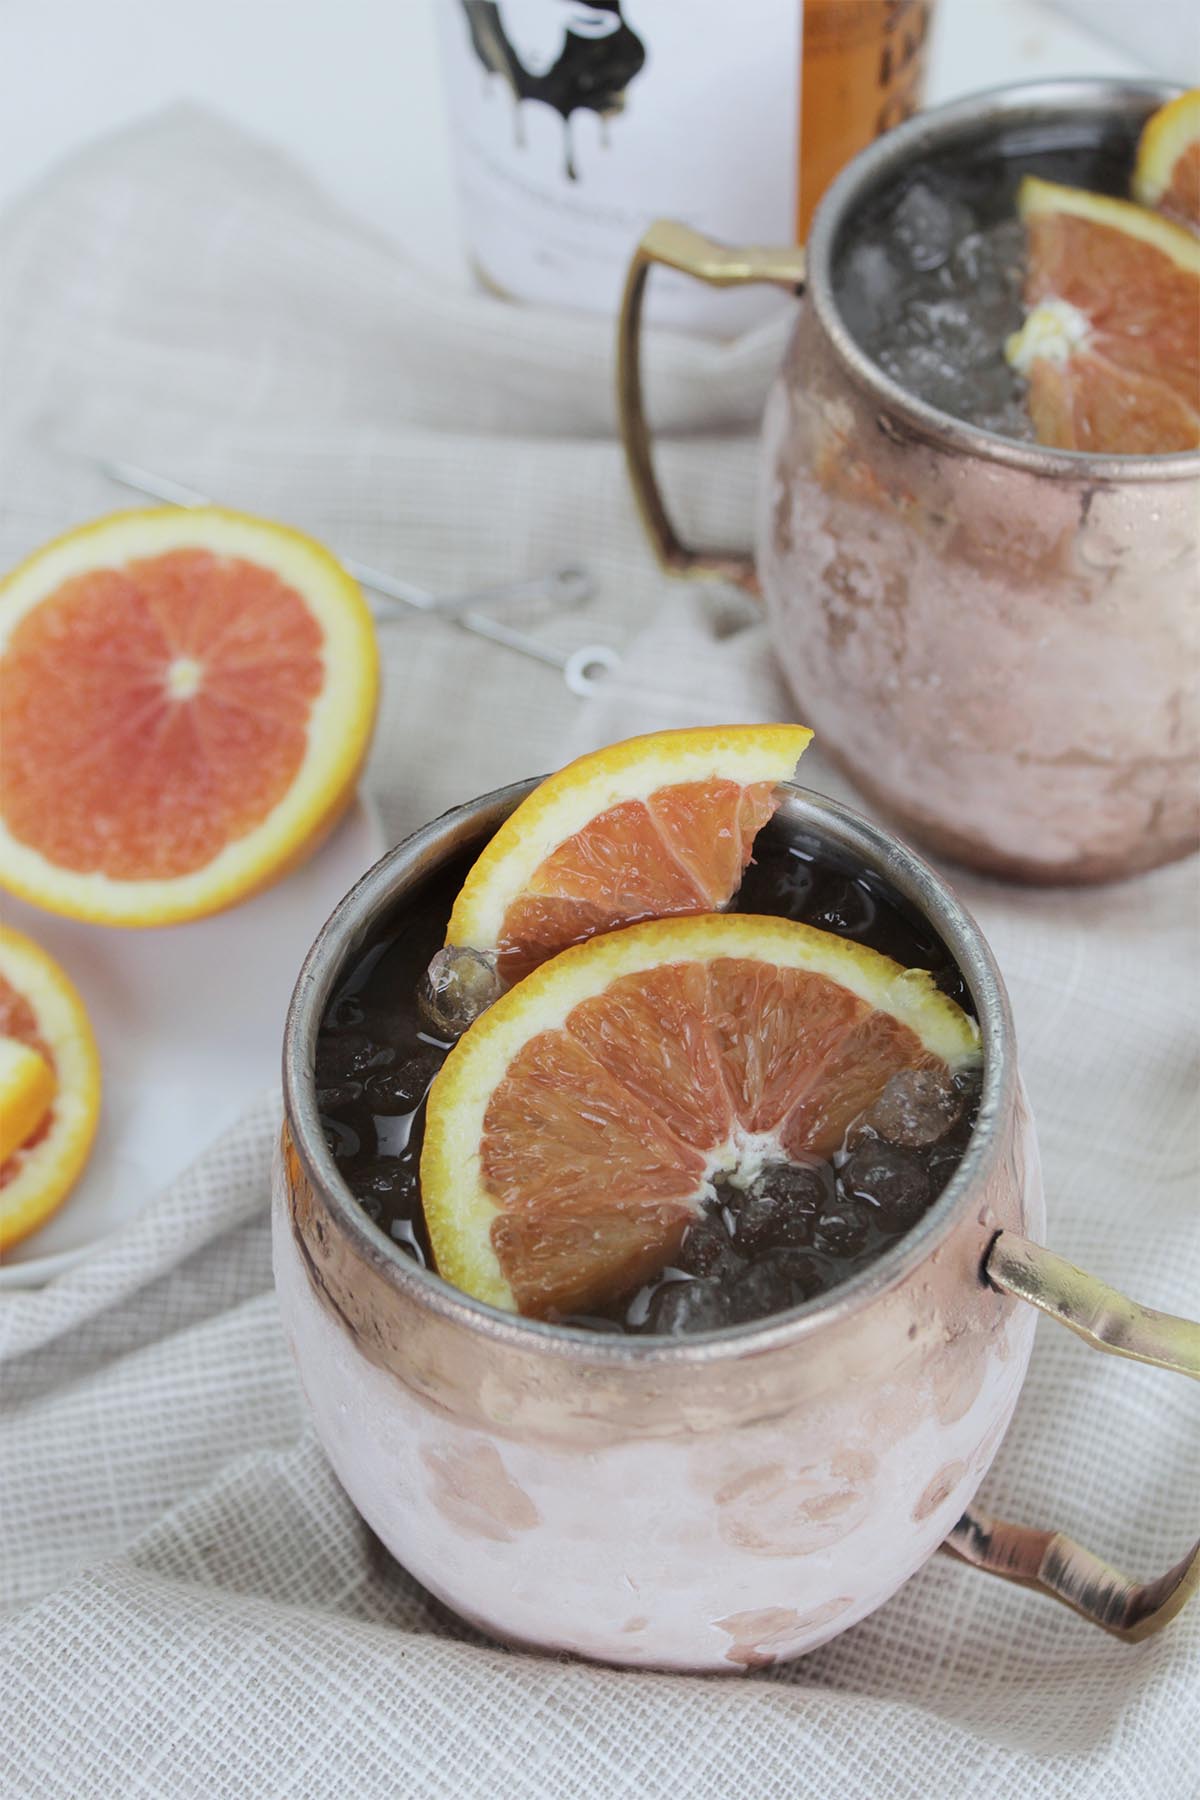 moscow mules in copper mug with orange slices